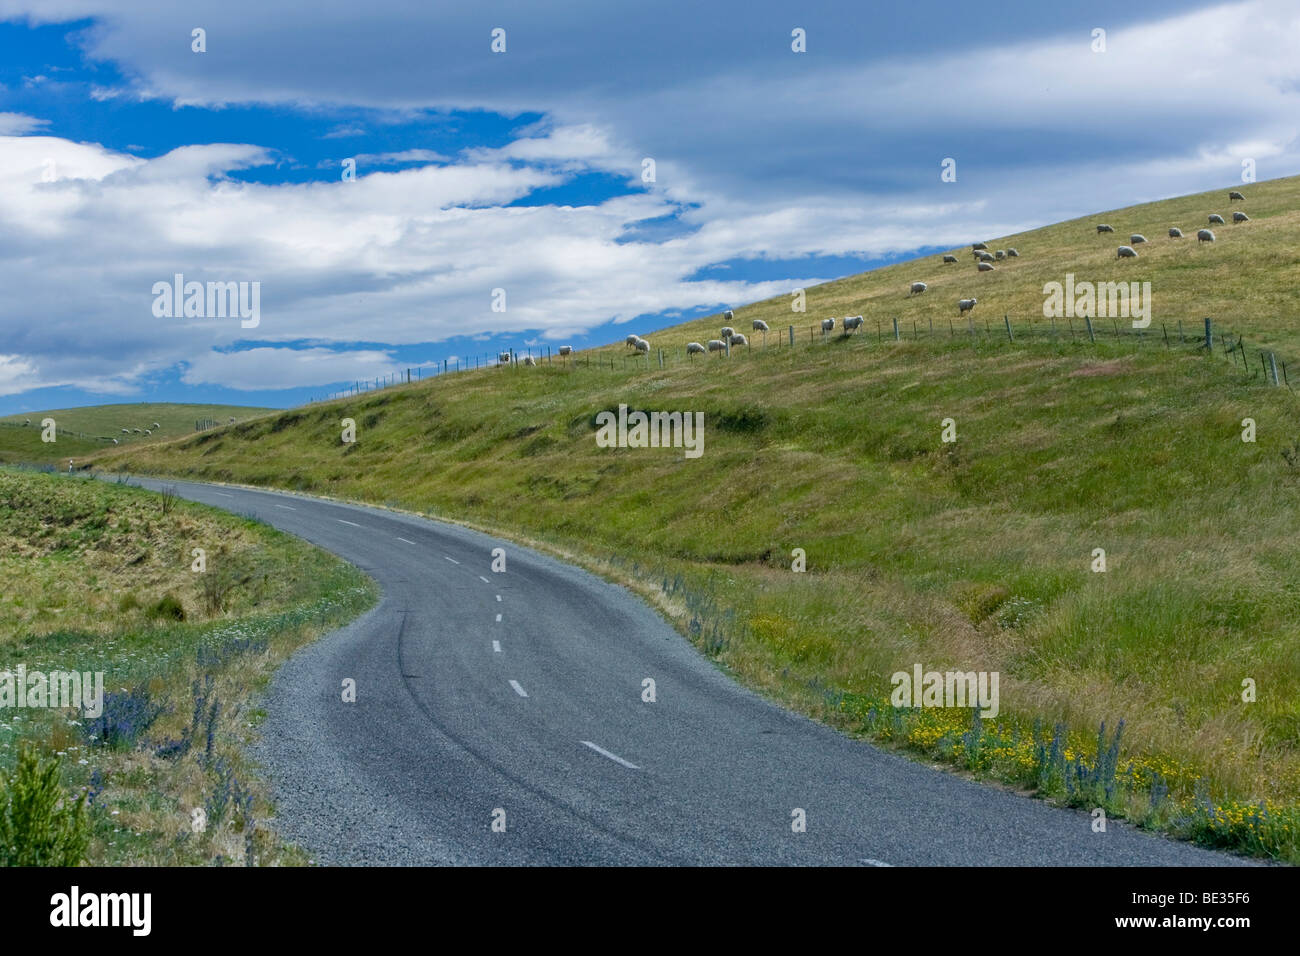 Country road next to a meadow with New Zealand sheep (Ovis orientalis aries), Cattle Creek, South Island, New Zealand Stock Photo